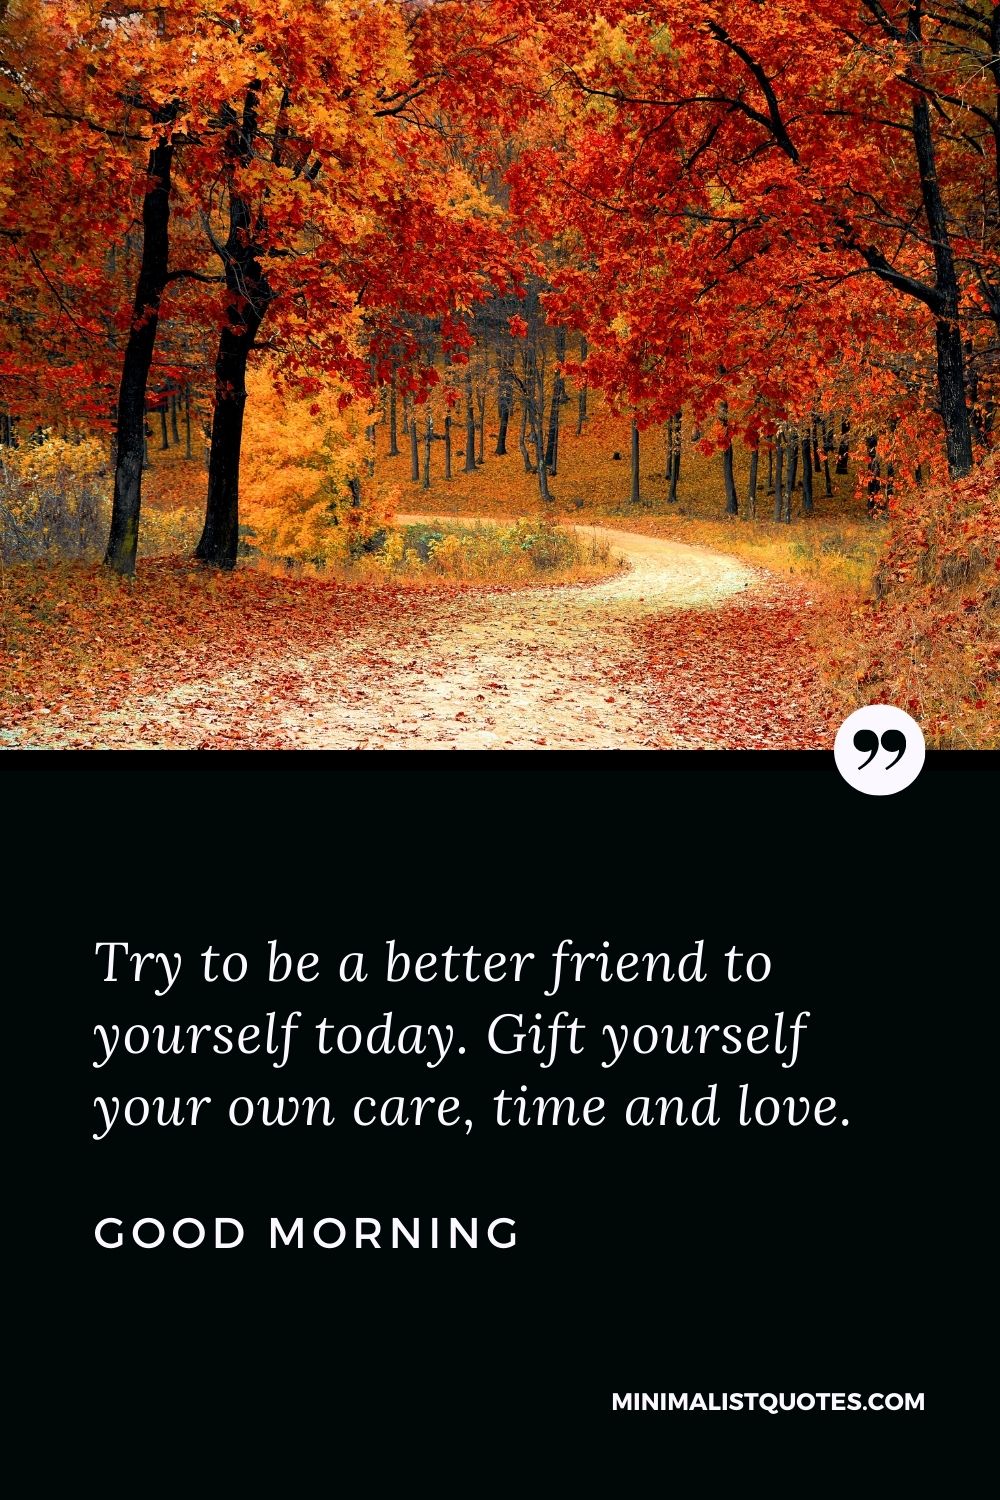 Good Morning Wish & Message With Image: Try to be a better friend to yourself today. Gift yourself your own care, time and love.